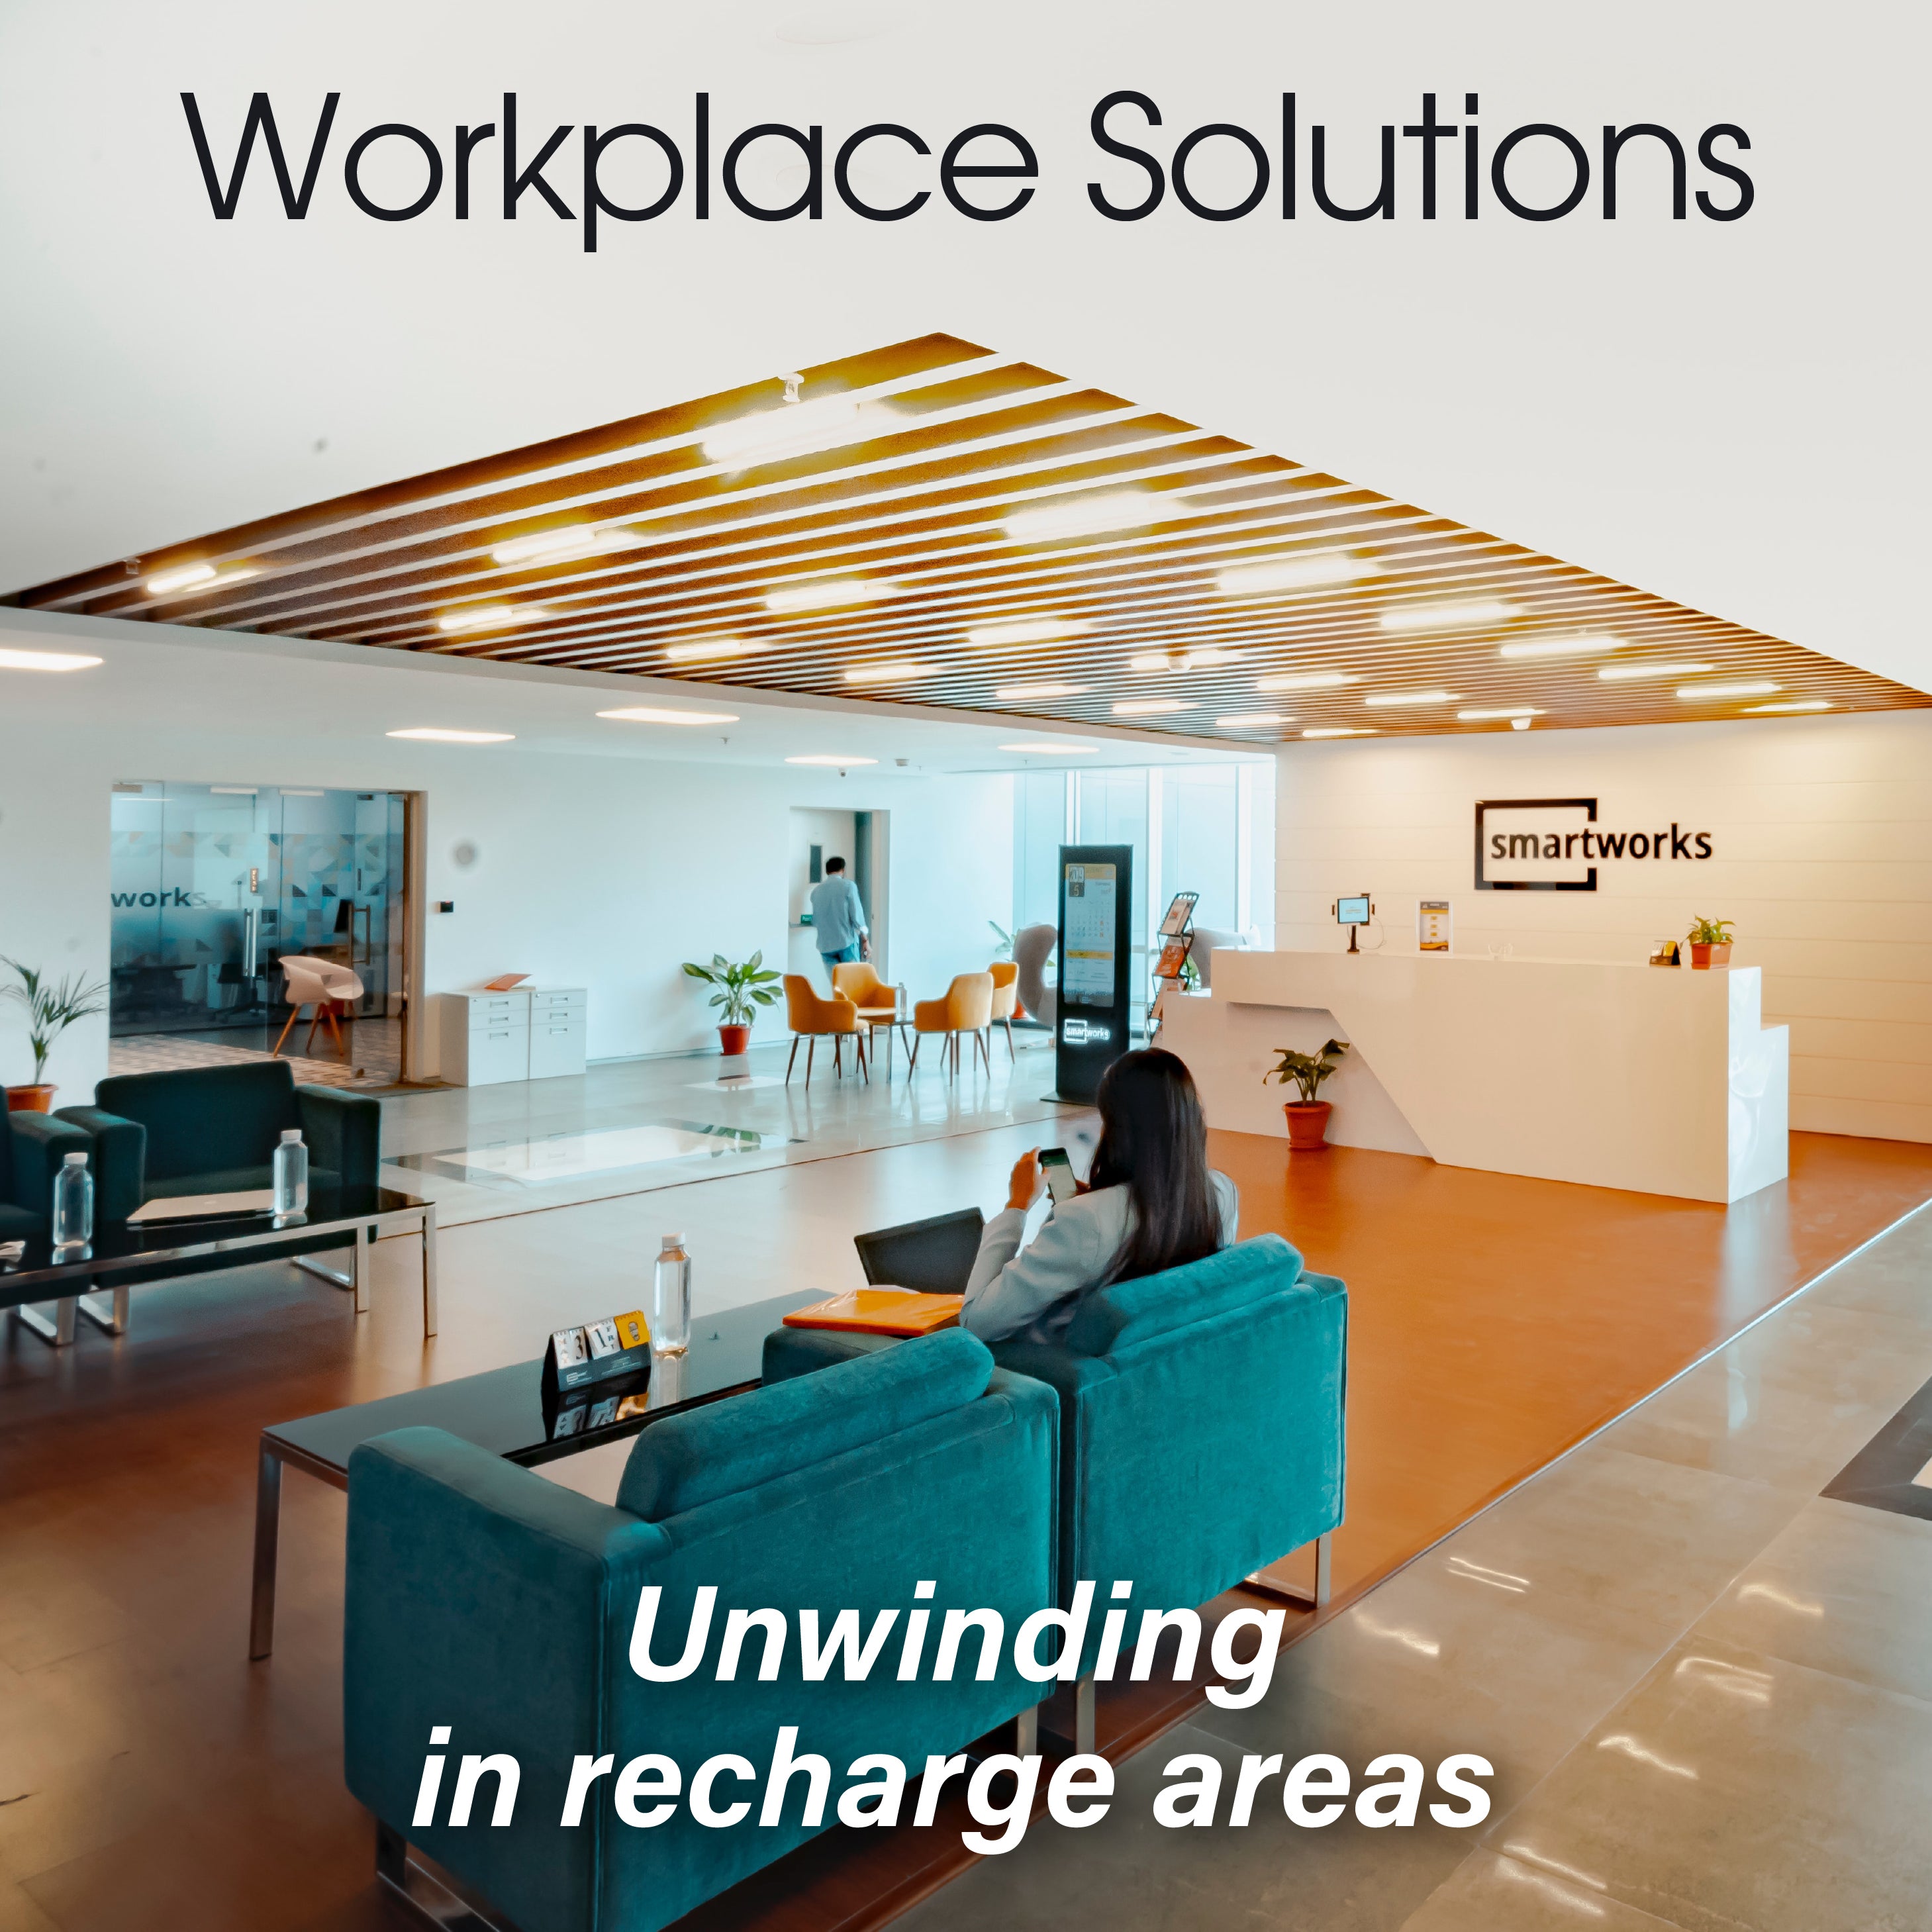 Workplace Solutions | Unwinding in recharge areas